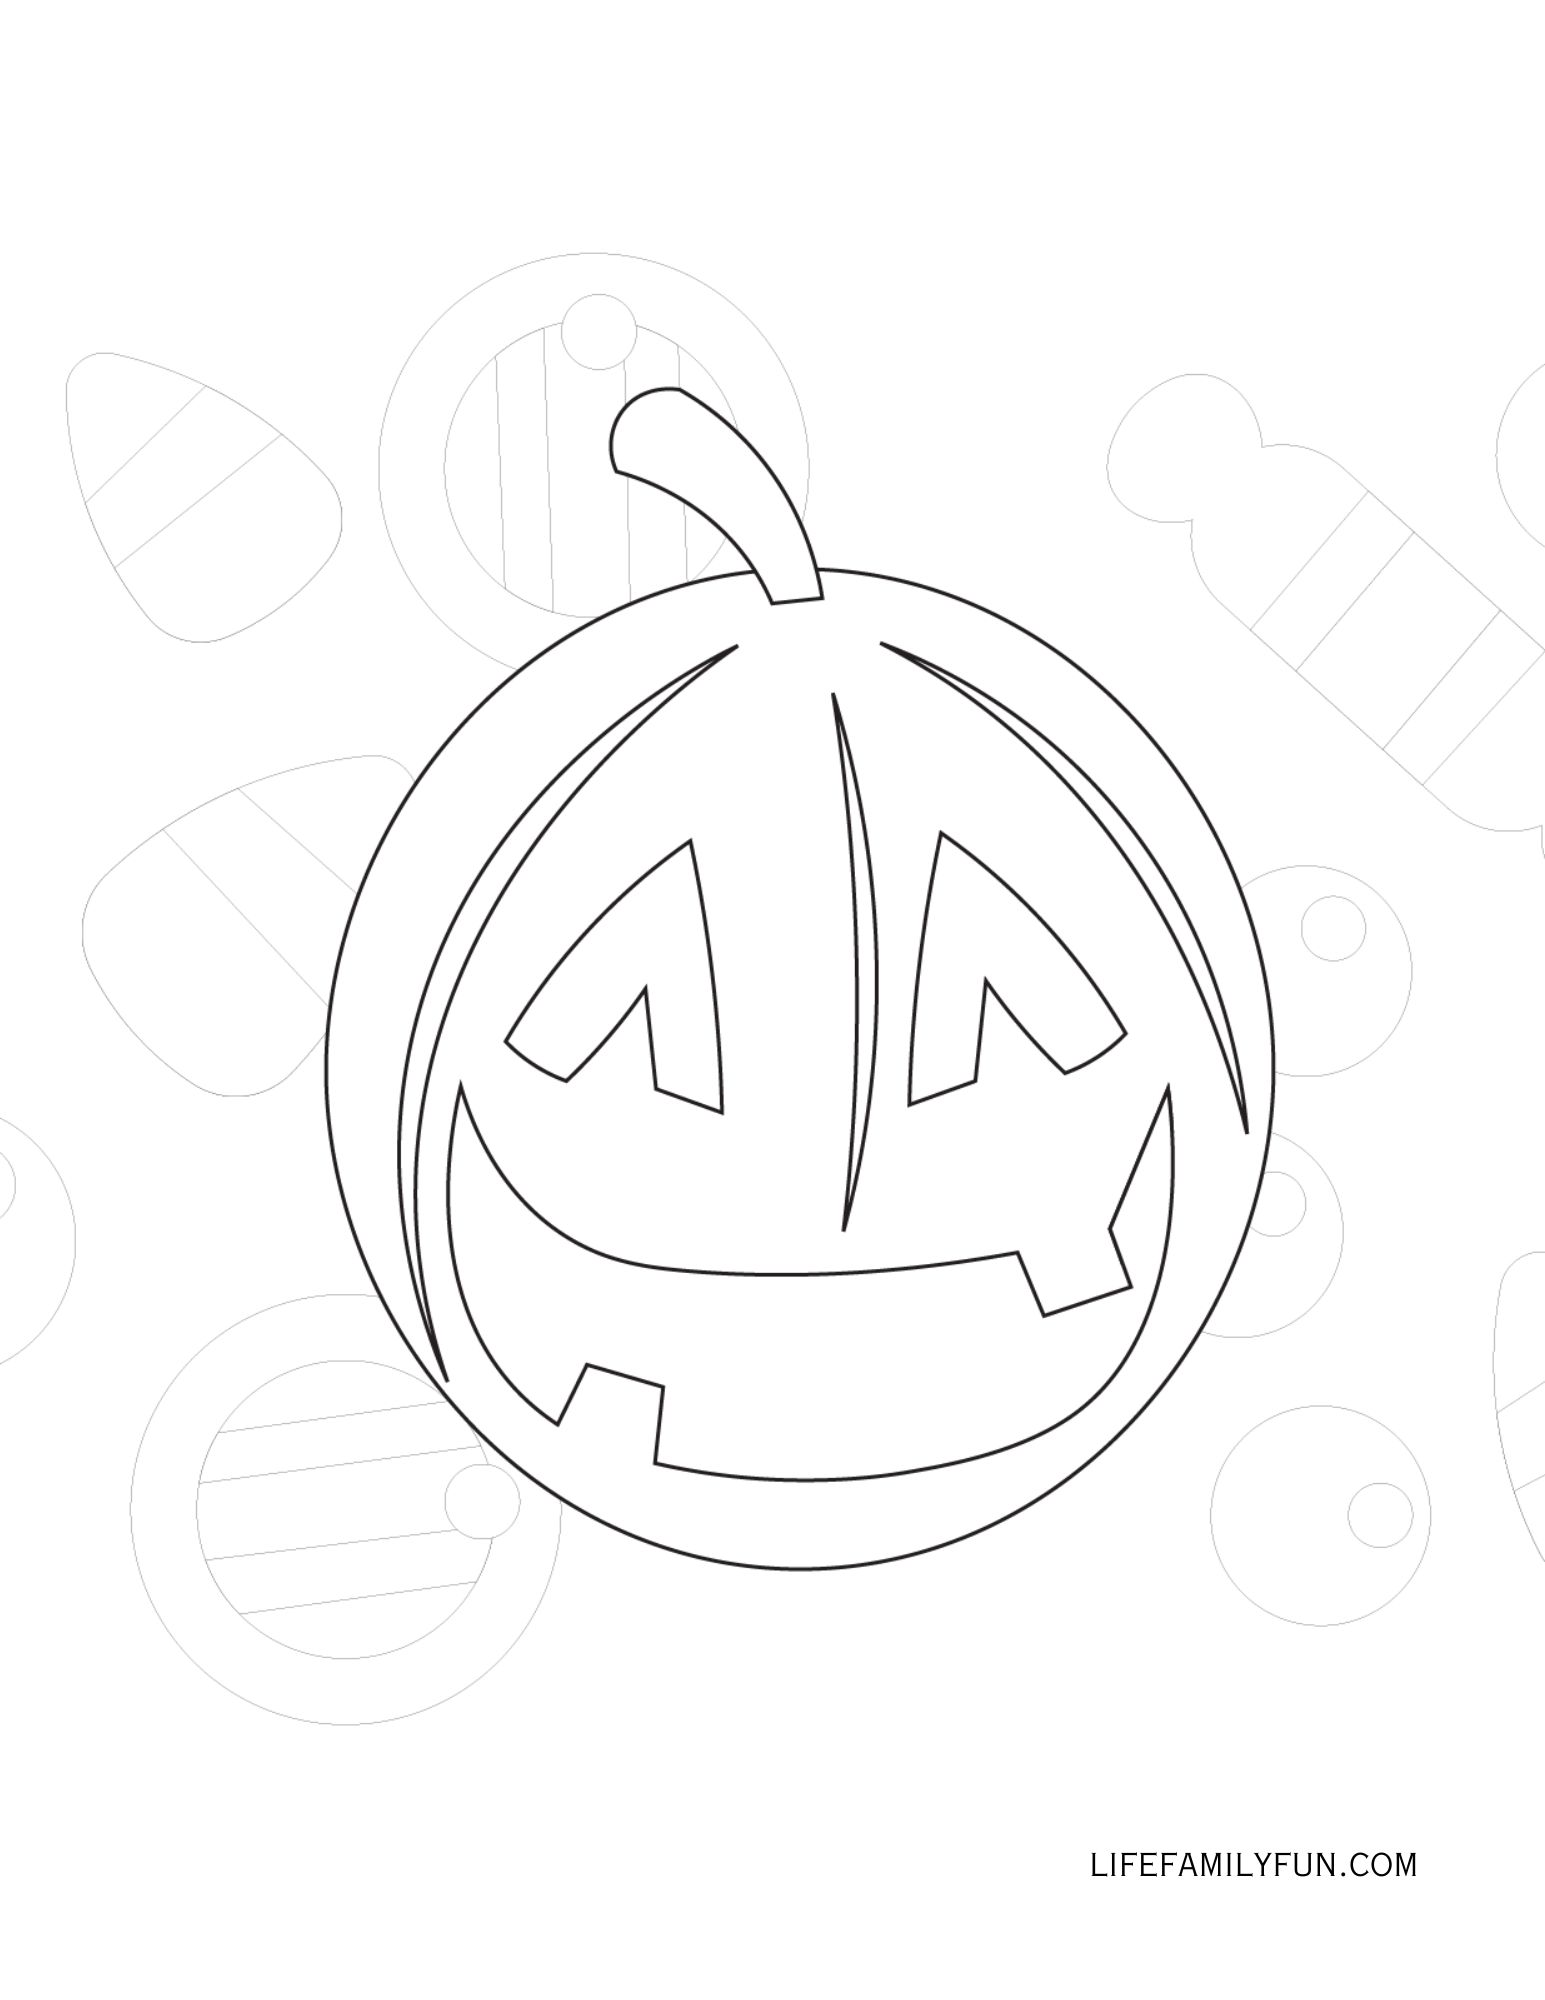 Carved Halloween Pumpkin Coloring Page